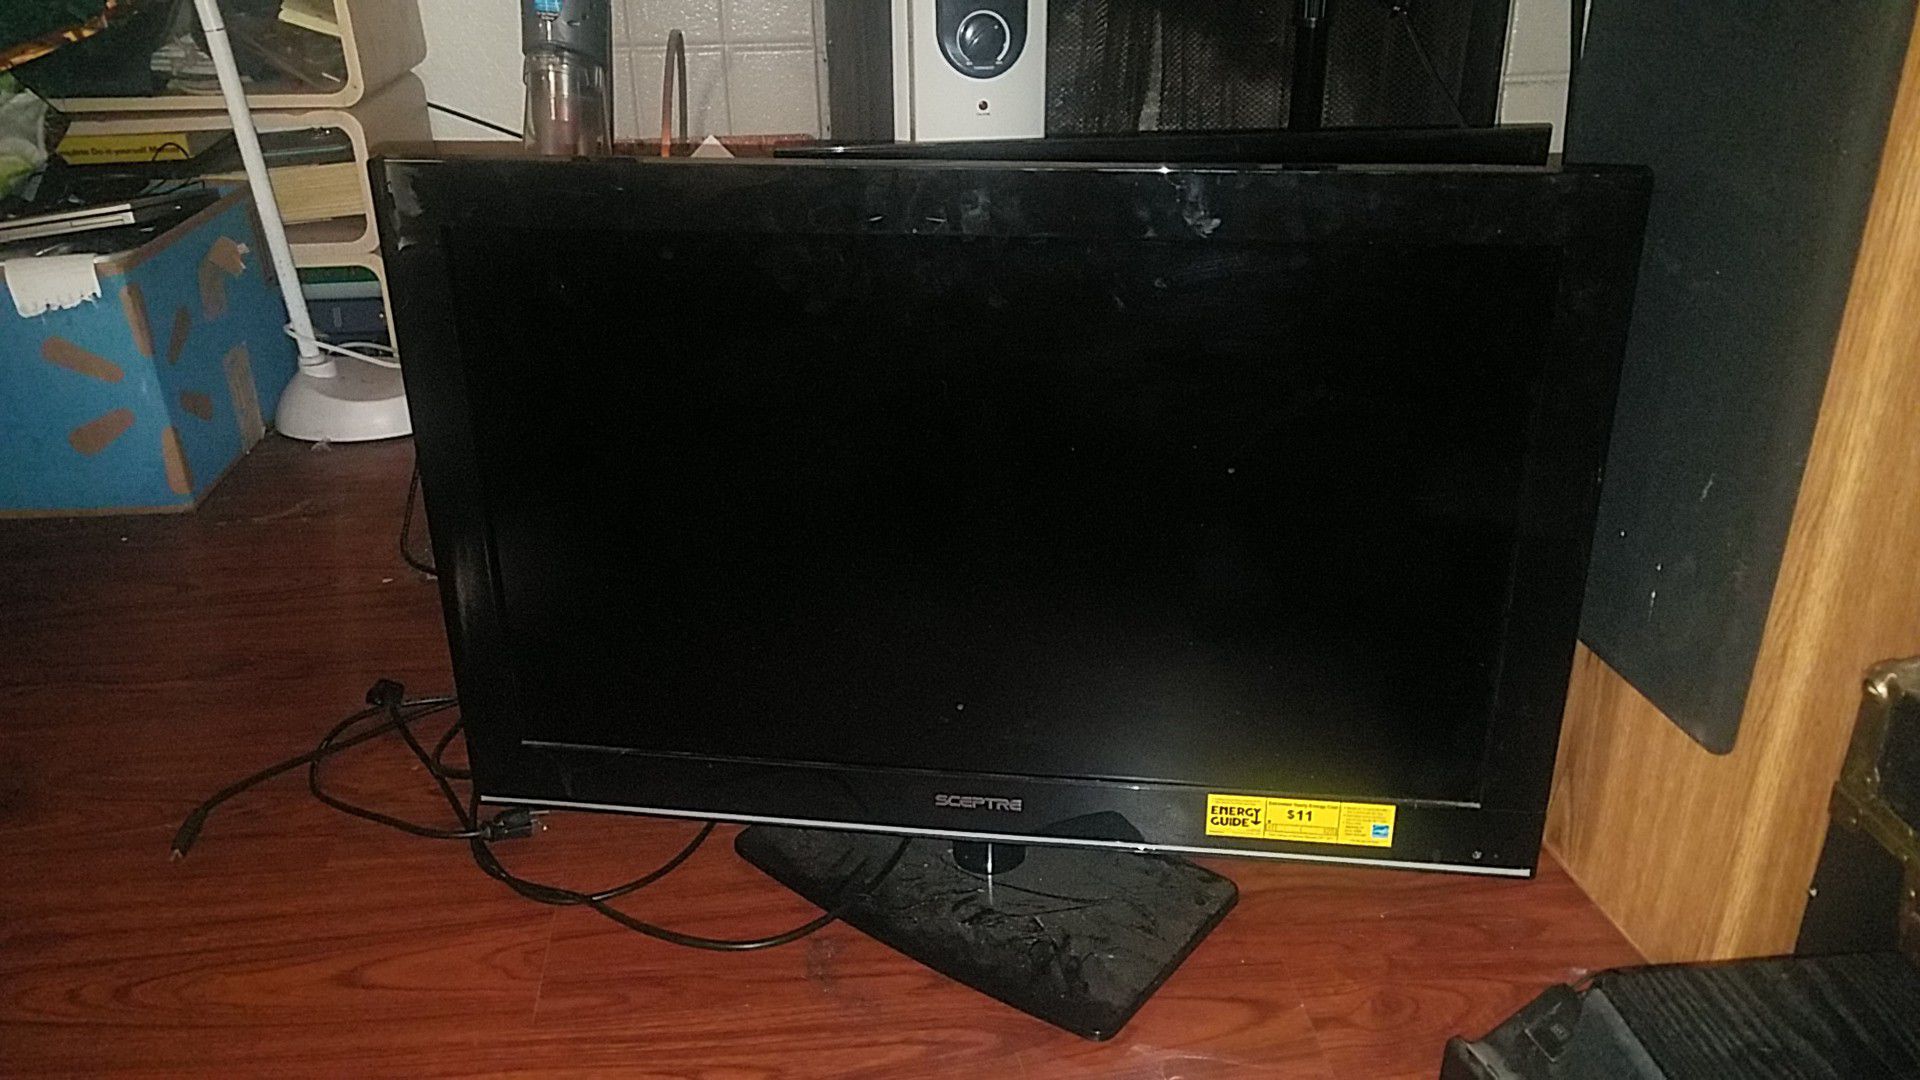 Sceptre 32 inch tv with remote, LG 32 inch tv